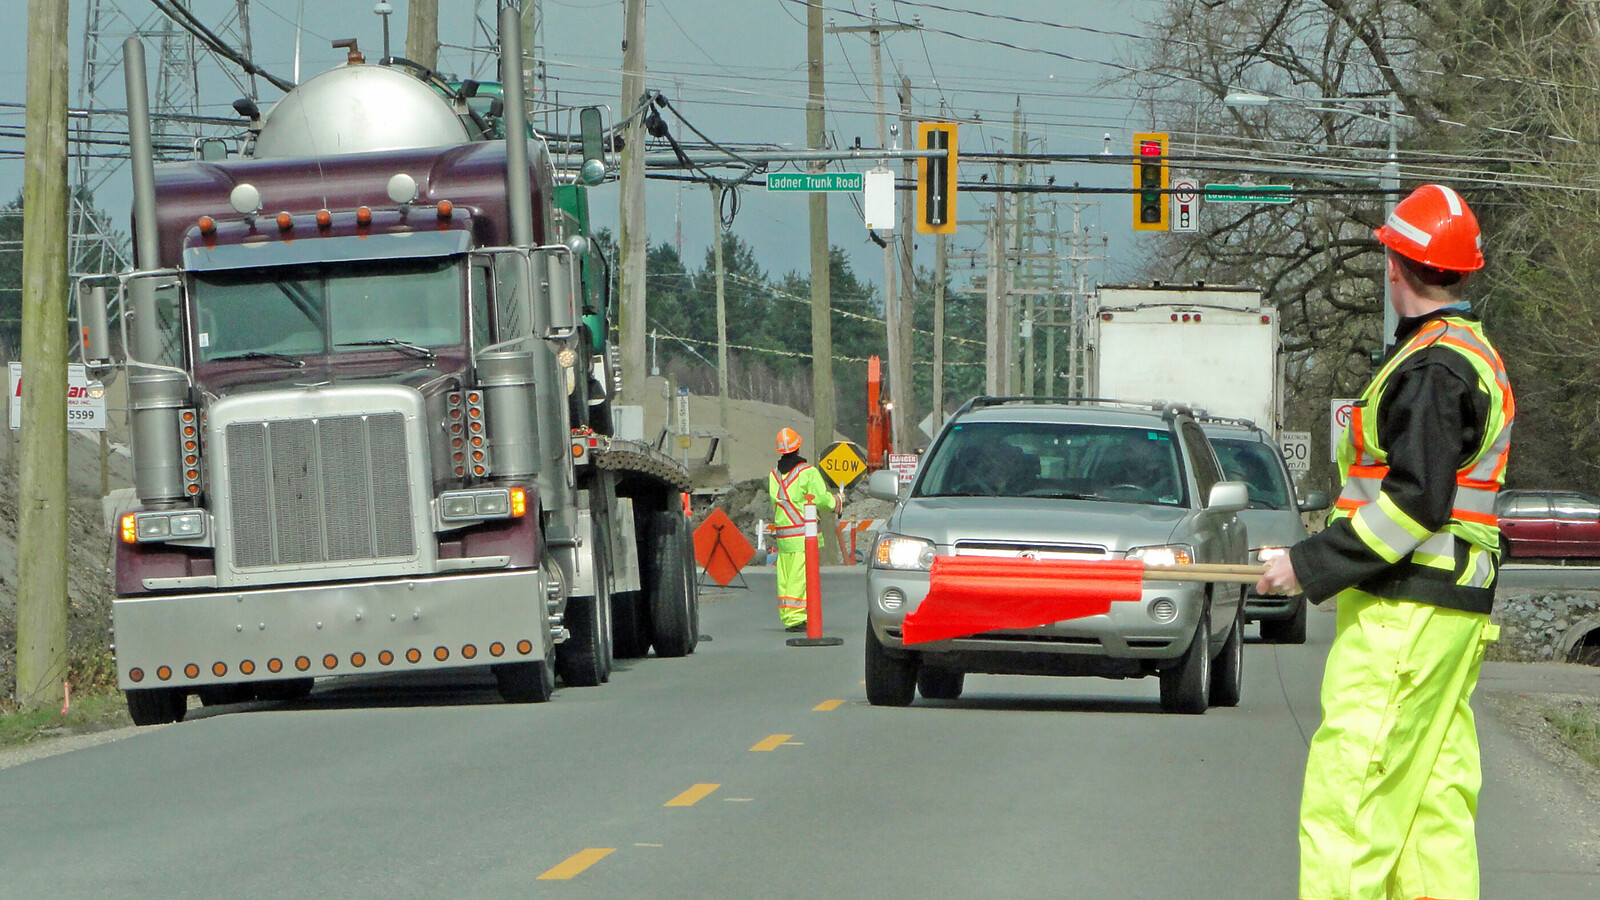 Busy road showing cars driving towards camera. A semi-truck is parked on the left side of the road and a worker, dressed in hi-vis, waves red flags to guide traffic.